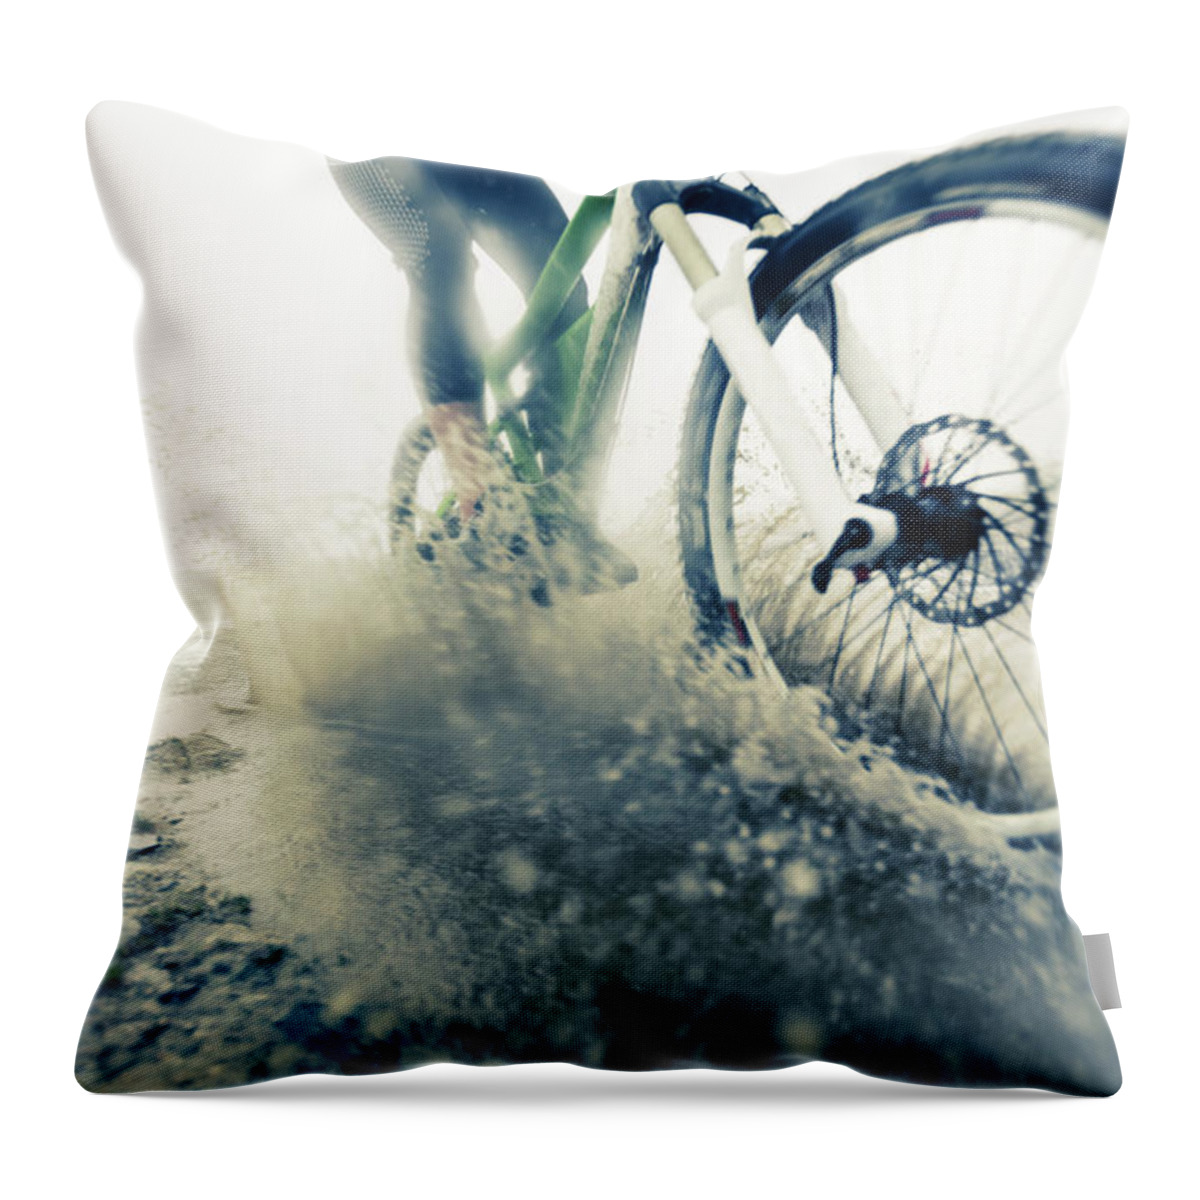 People Throw Pillow featuring the photograph Mountain Biker Racing Through Puddle by Nullplus